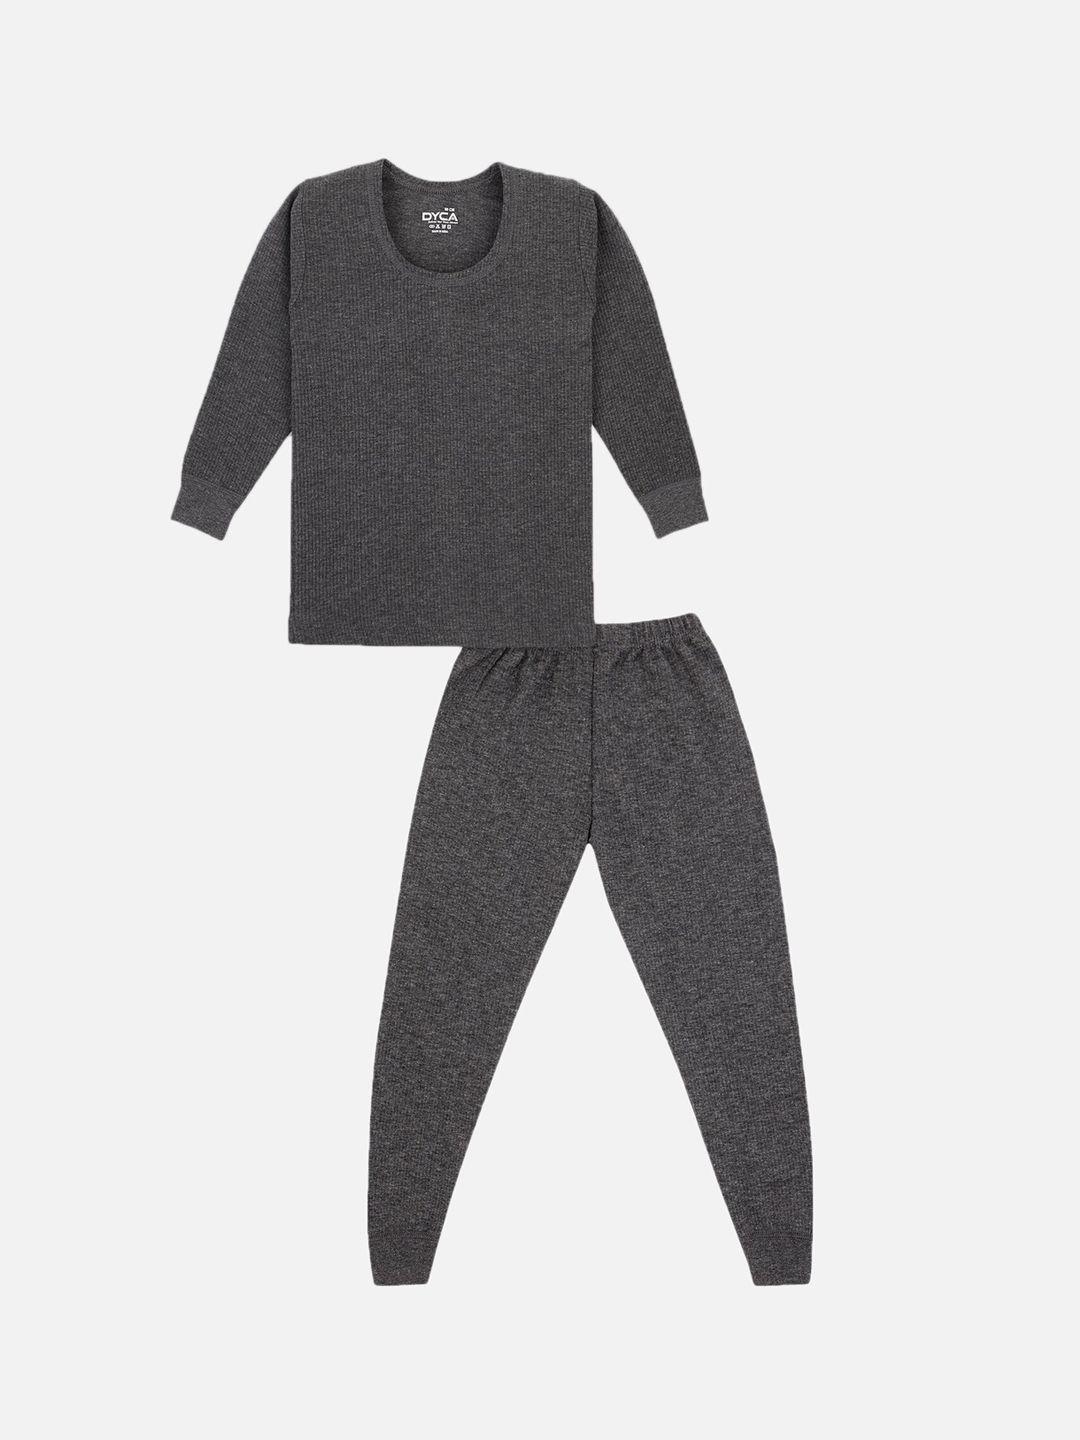 dyca unisex kids charcoal grey solid thermal set